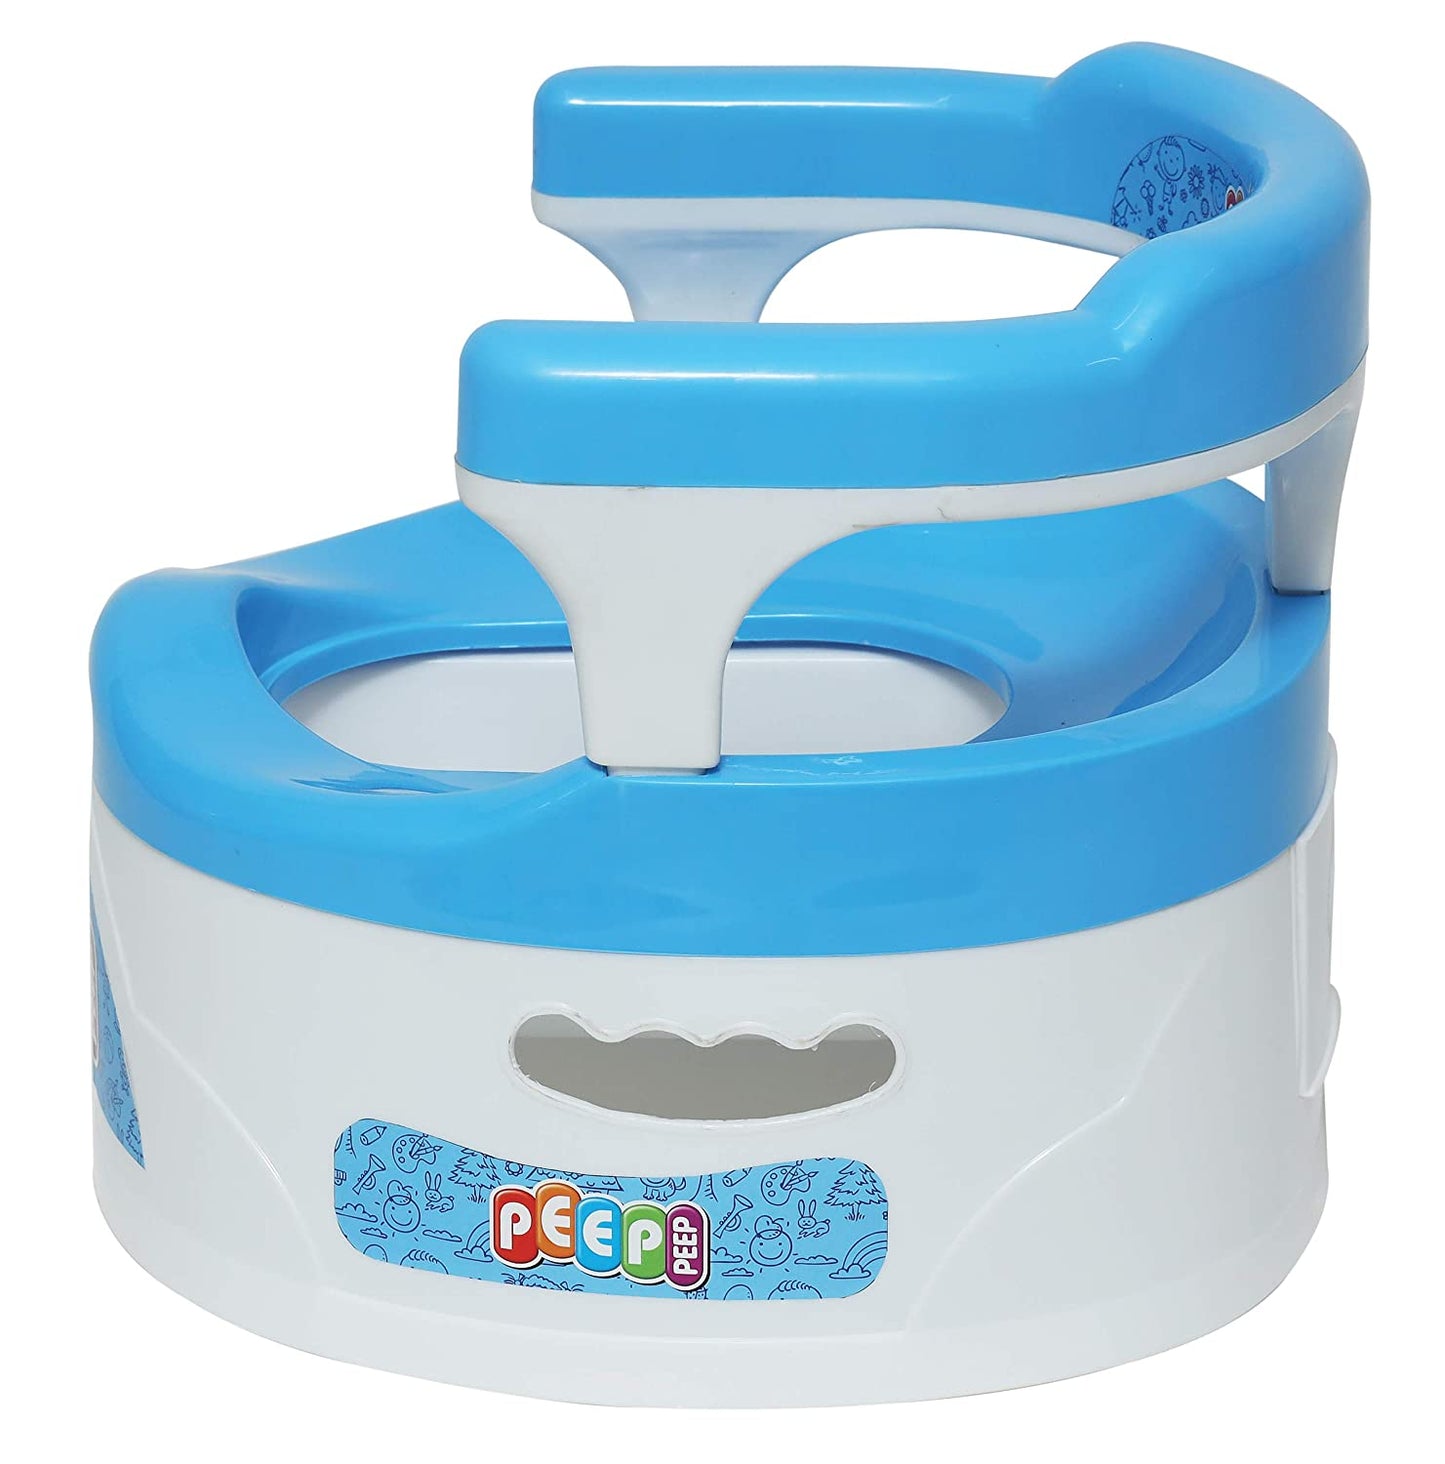 Peep Peep P300 2-in-1 Baby Chair & Potty Trainer for 12m-3yrs Kids, Easy Clean, Safe & Engaging Design, Space-Saving Solution